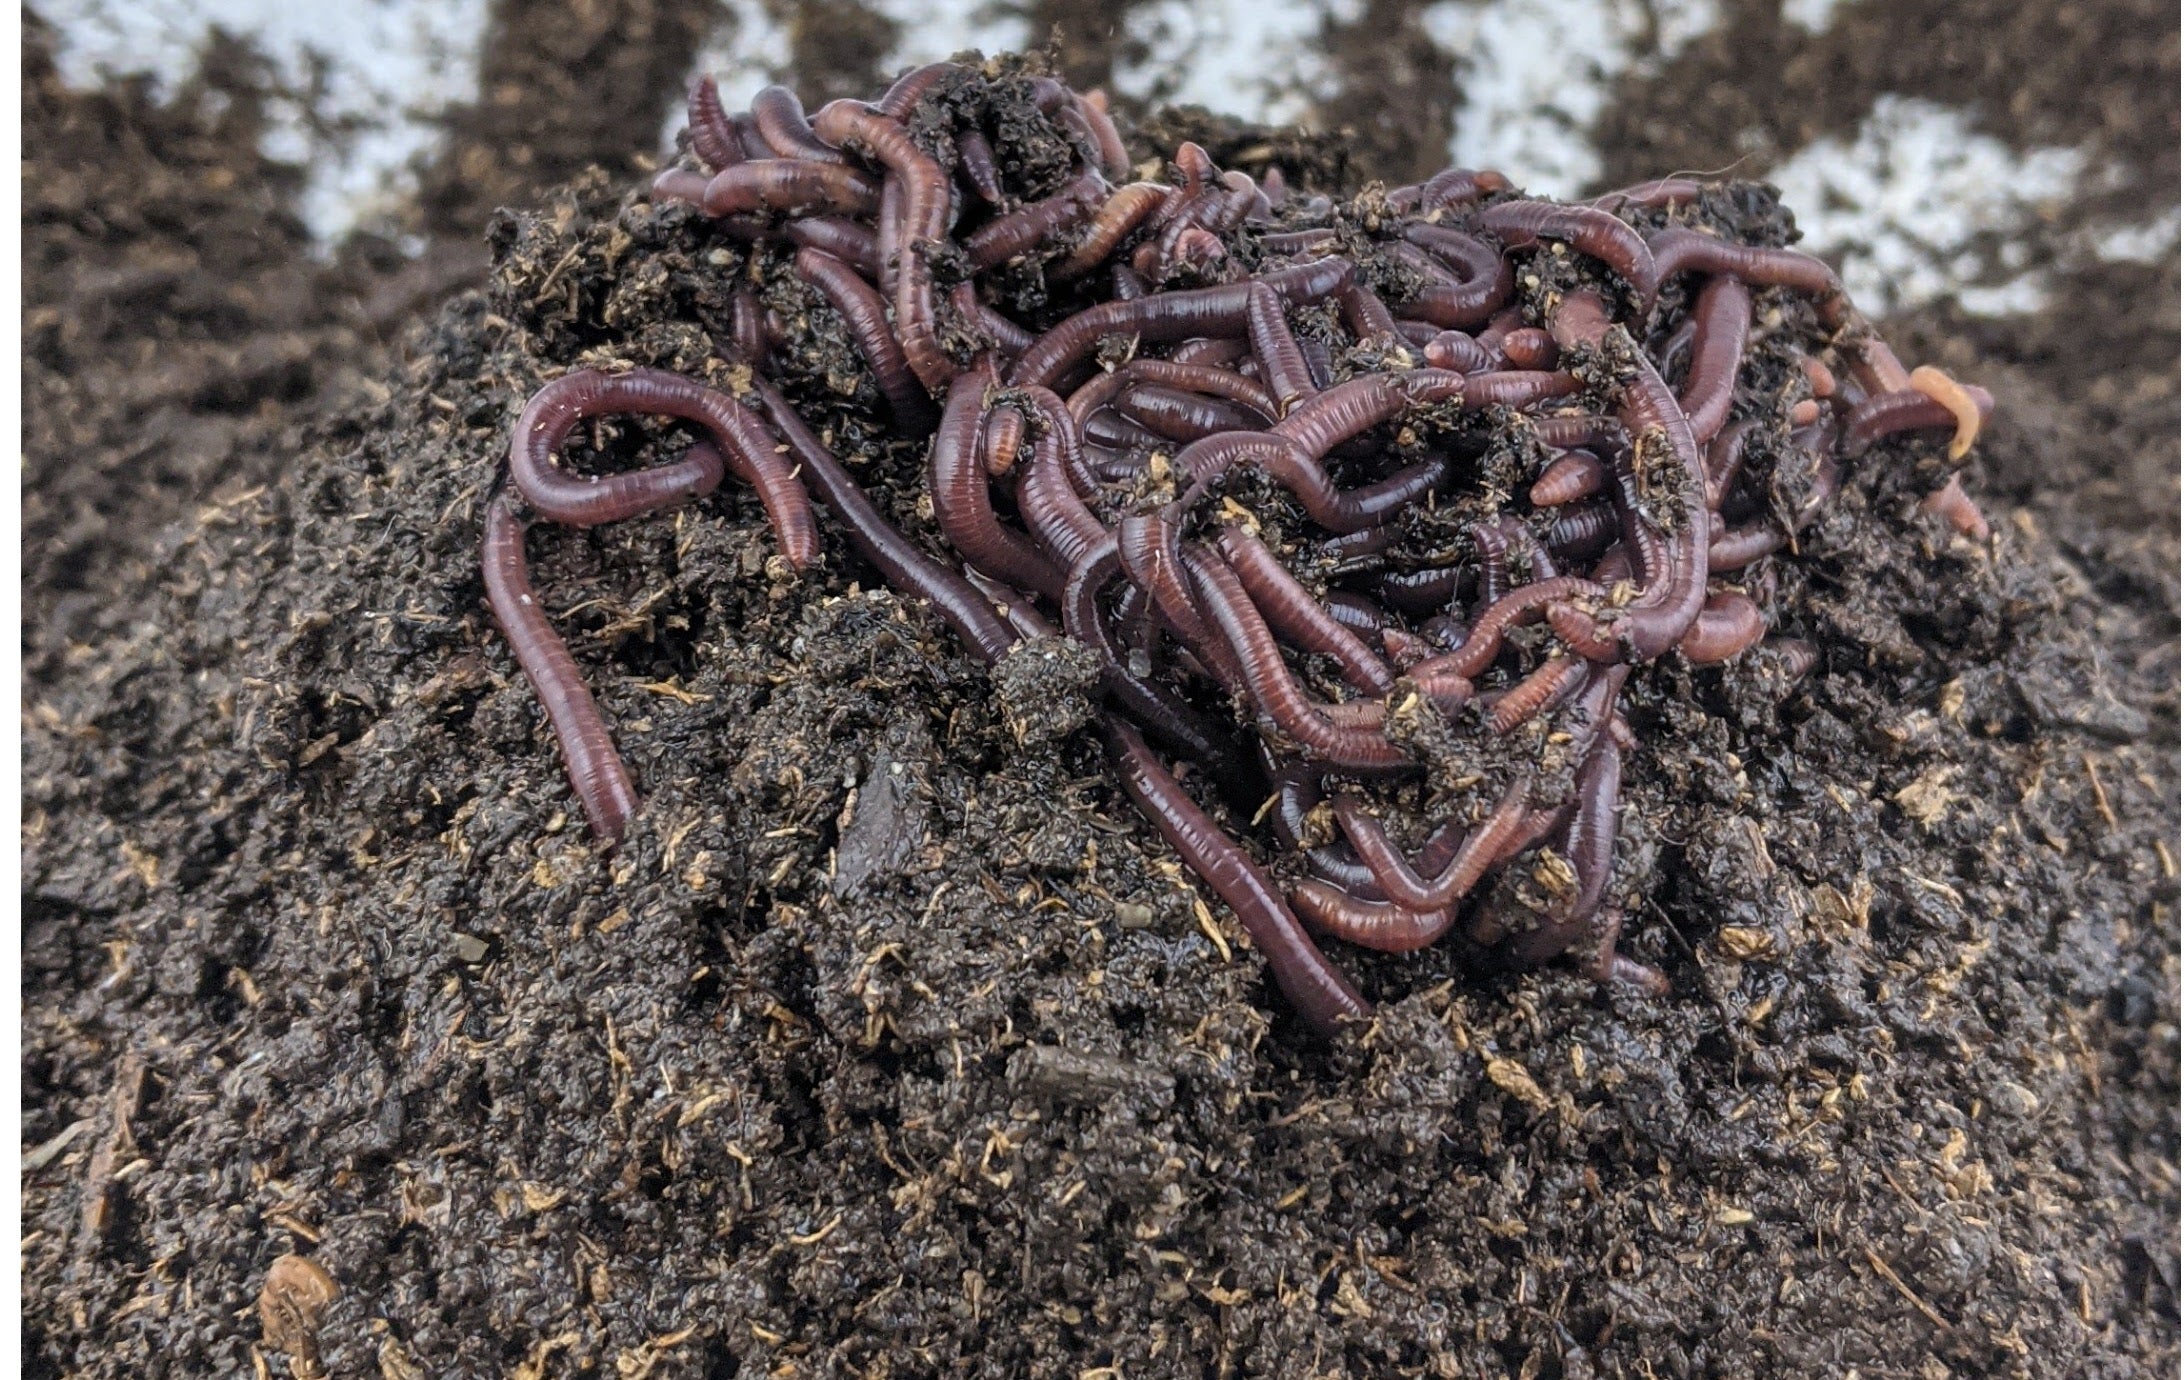 Buy Live Composting Worms, Worm Castings, & More